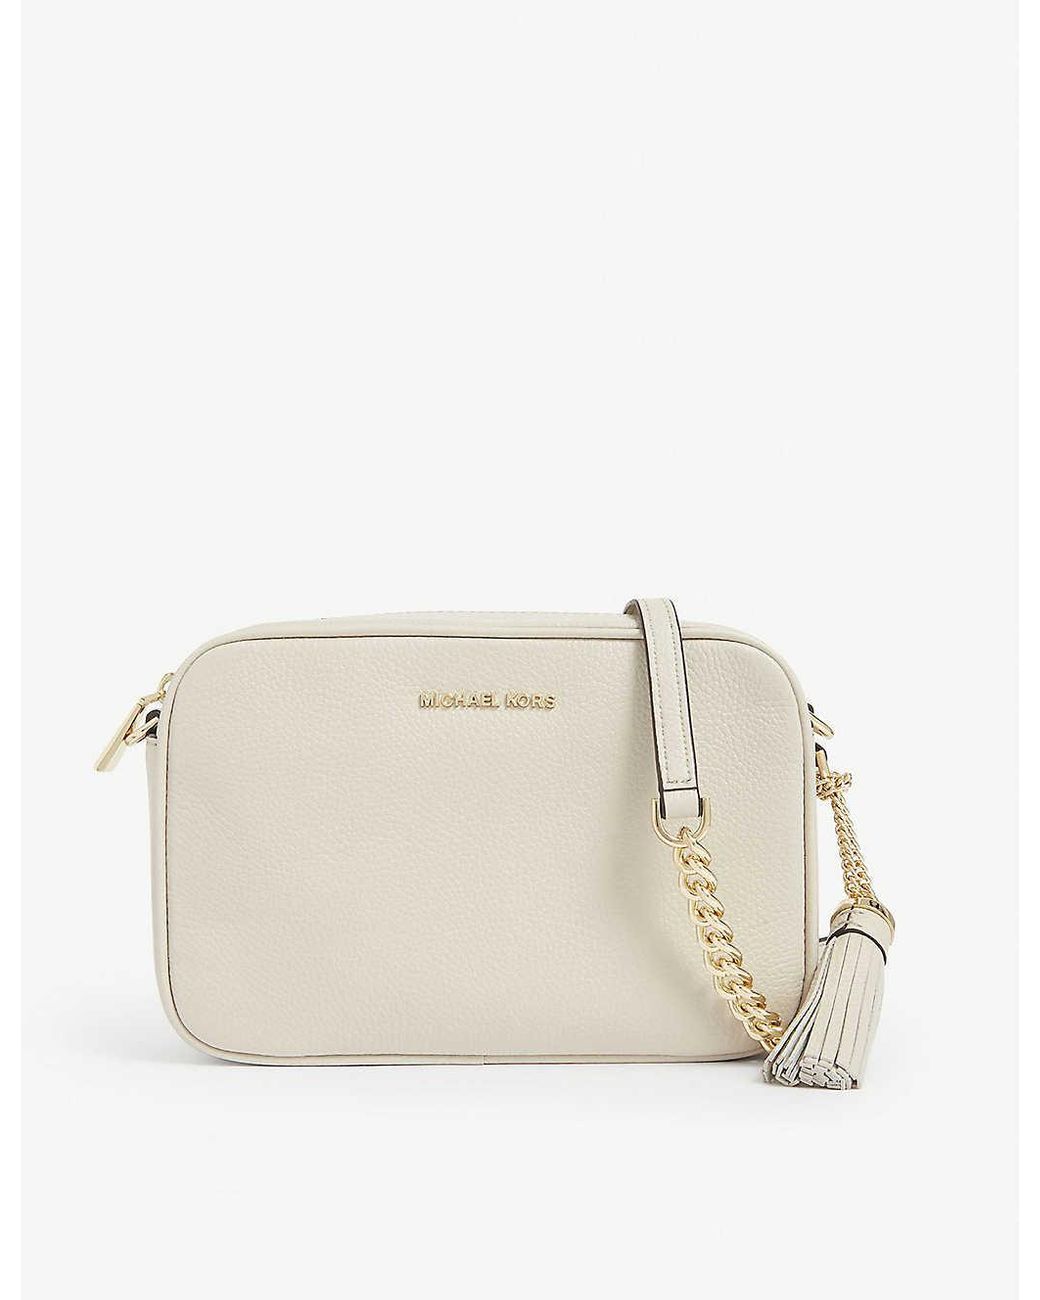 MICHAEL Michael Kors Ginny Leather Cross-body Bag in Natural | Lyst